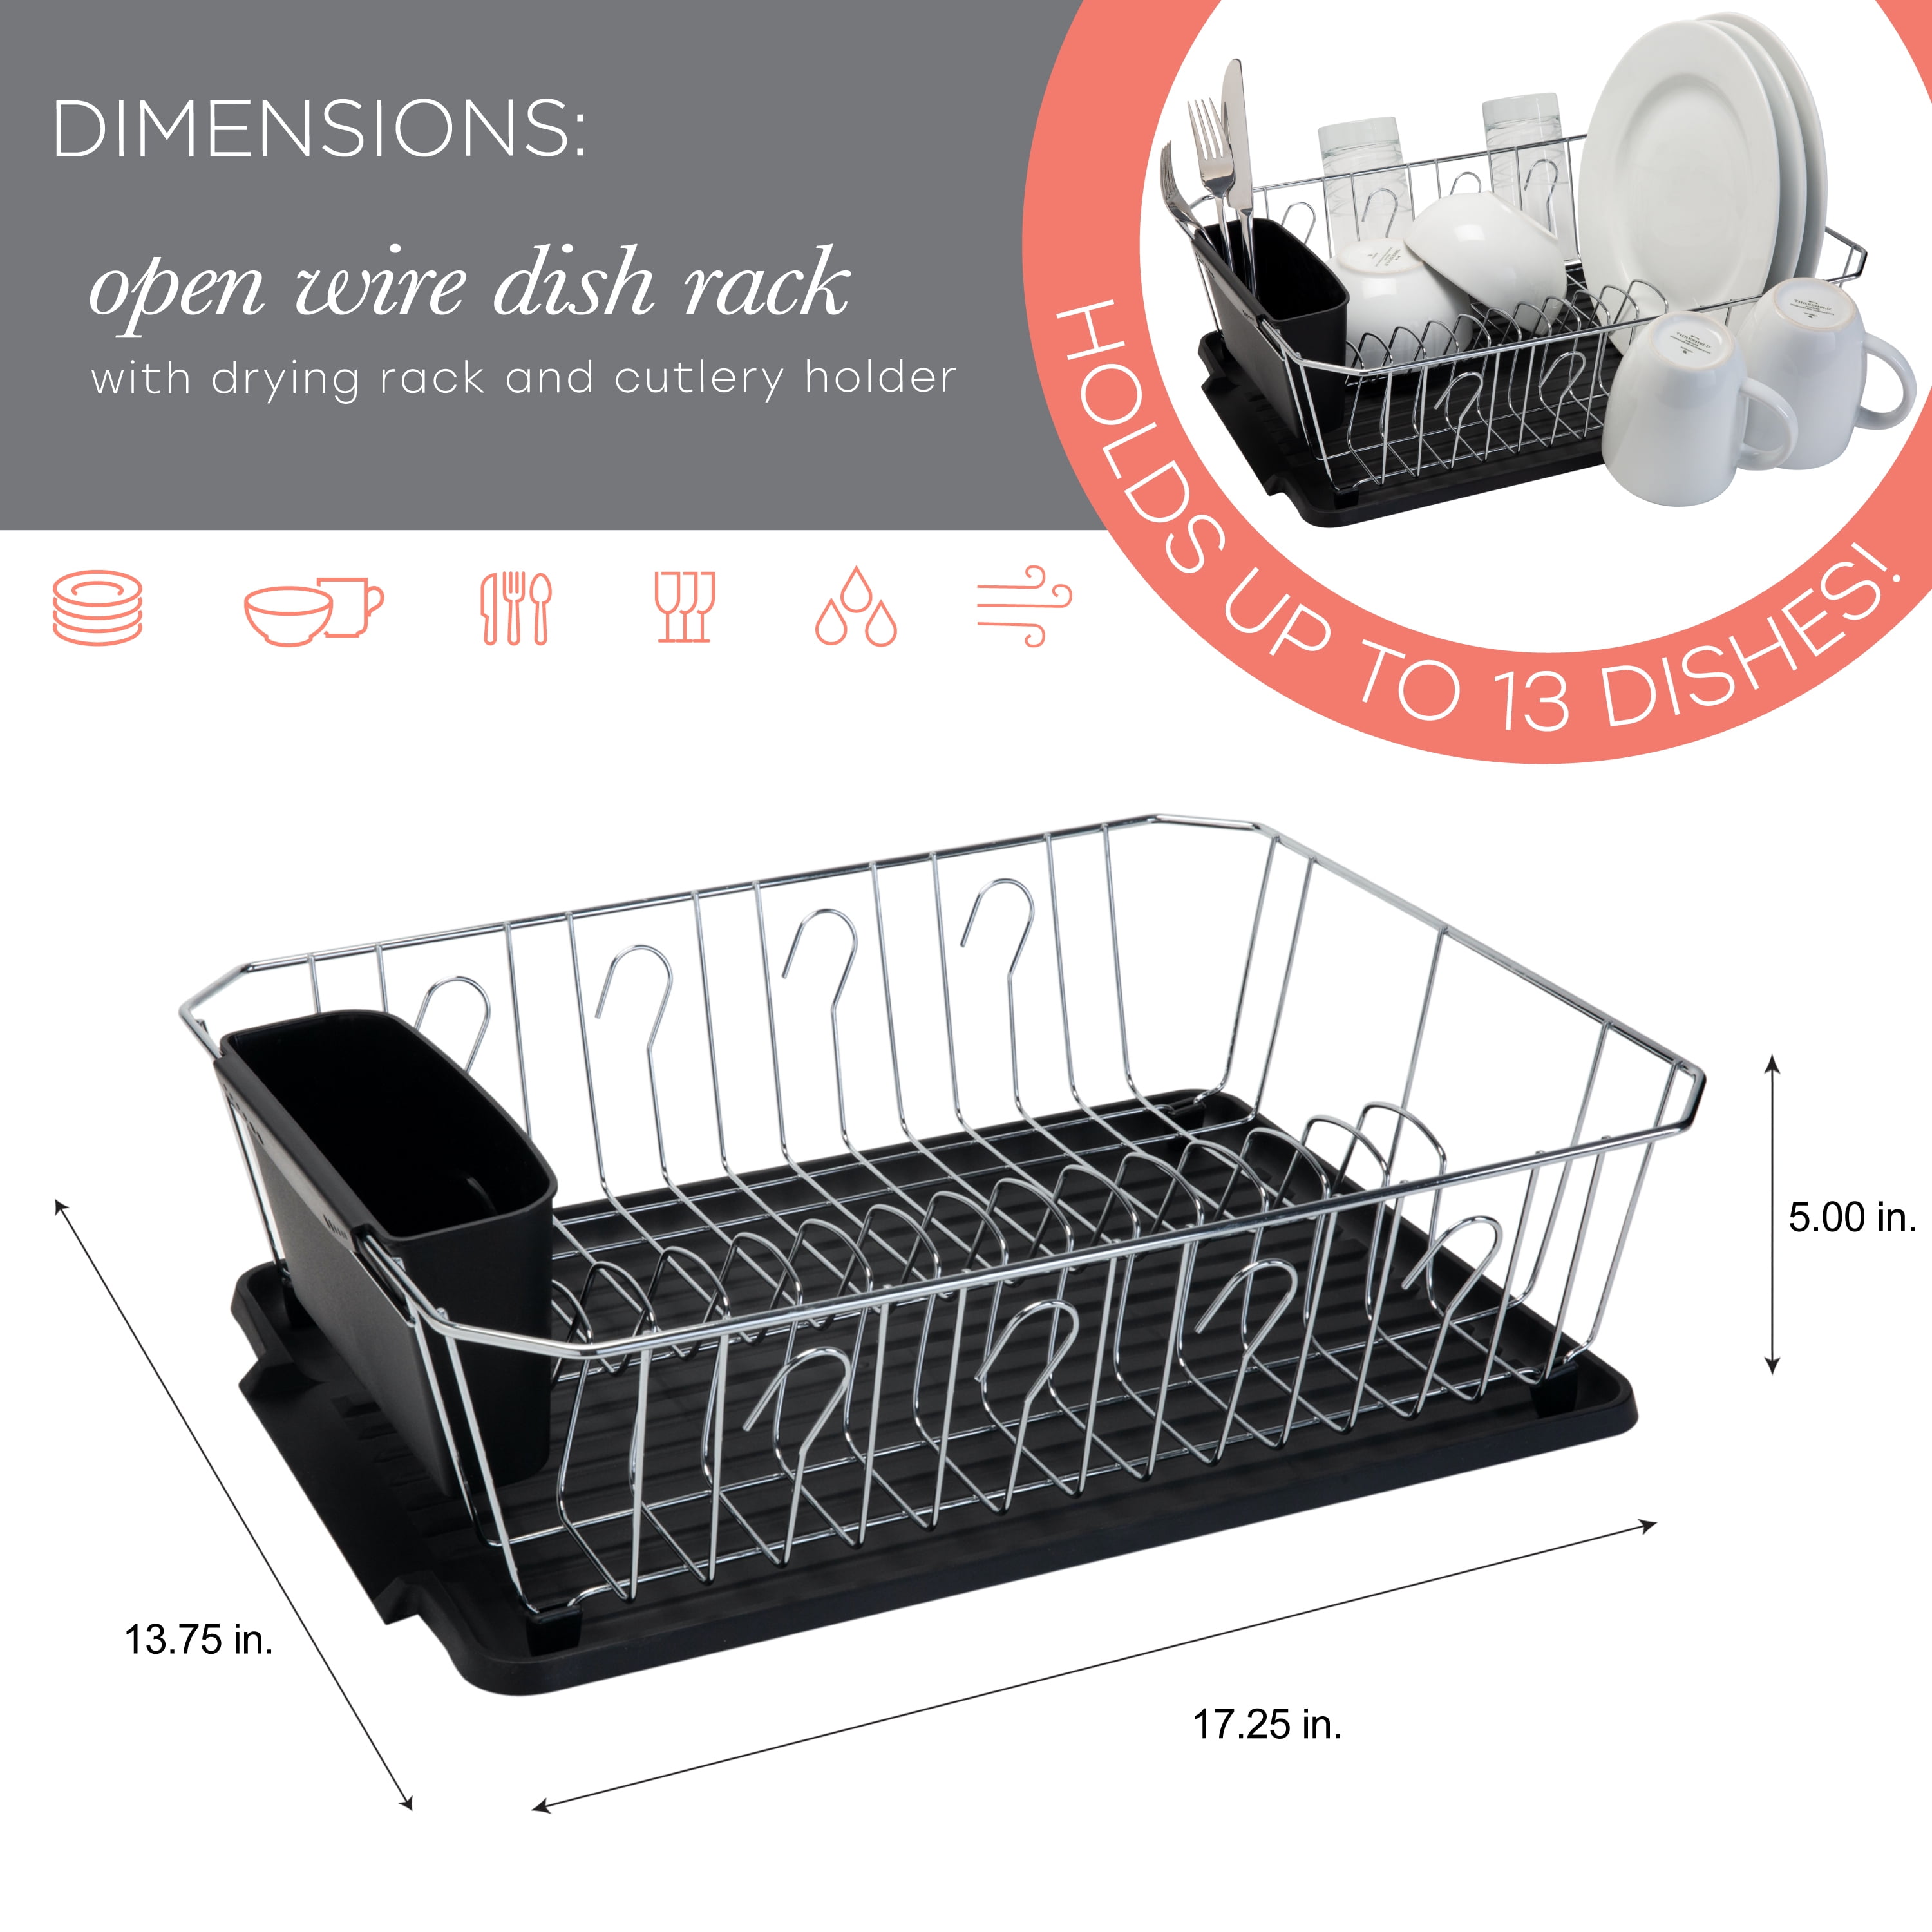 Agptek 3 Level Chrome Dish Drying Rack Kitchen Dish Drainer Storage with Draining Board and Cutlery Cup 22.04 x 9.05 x 18.50 in - M - Silver